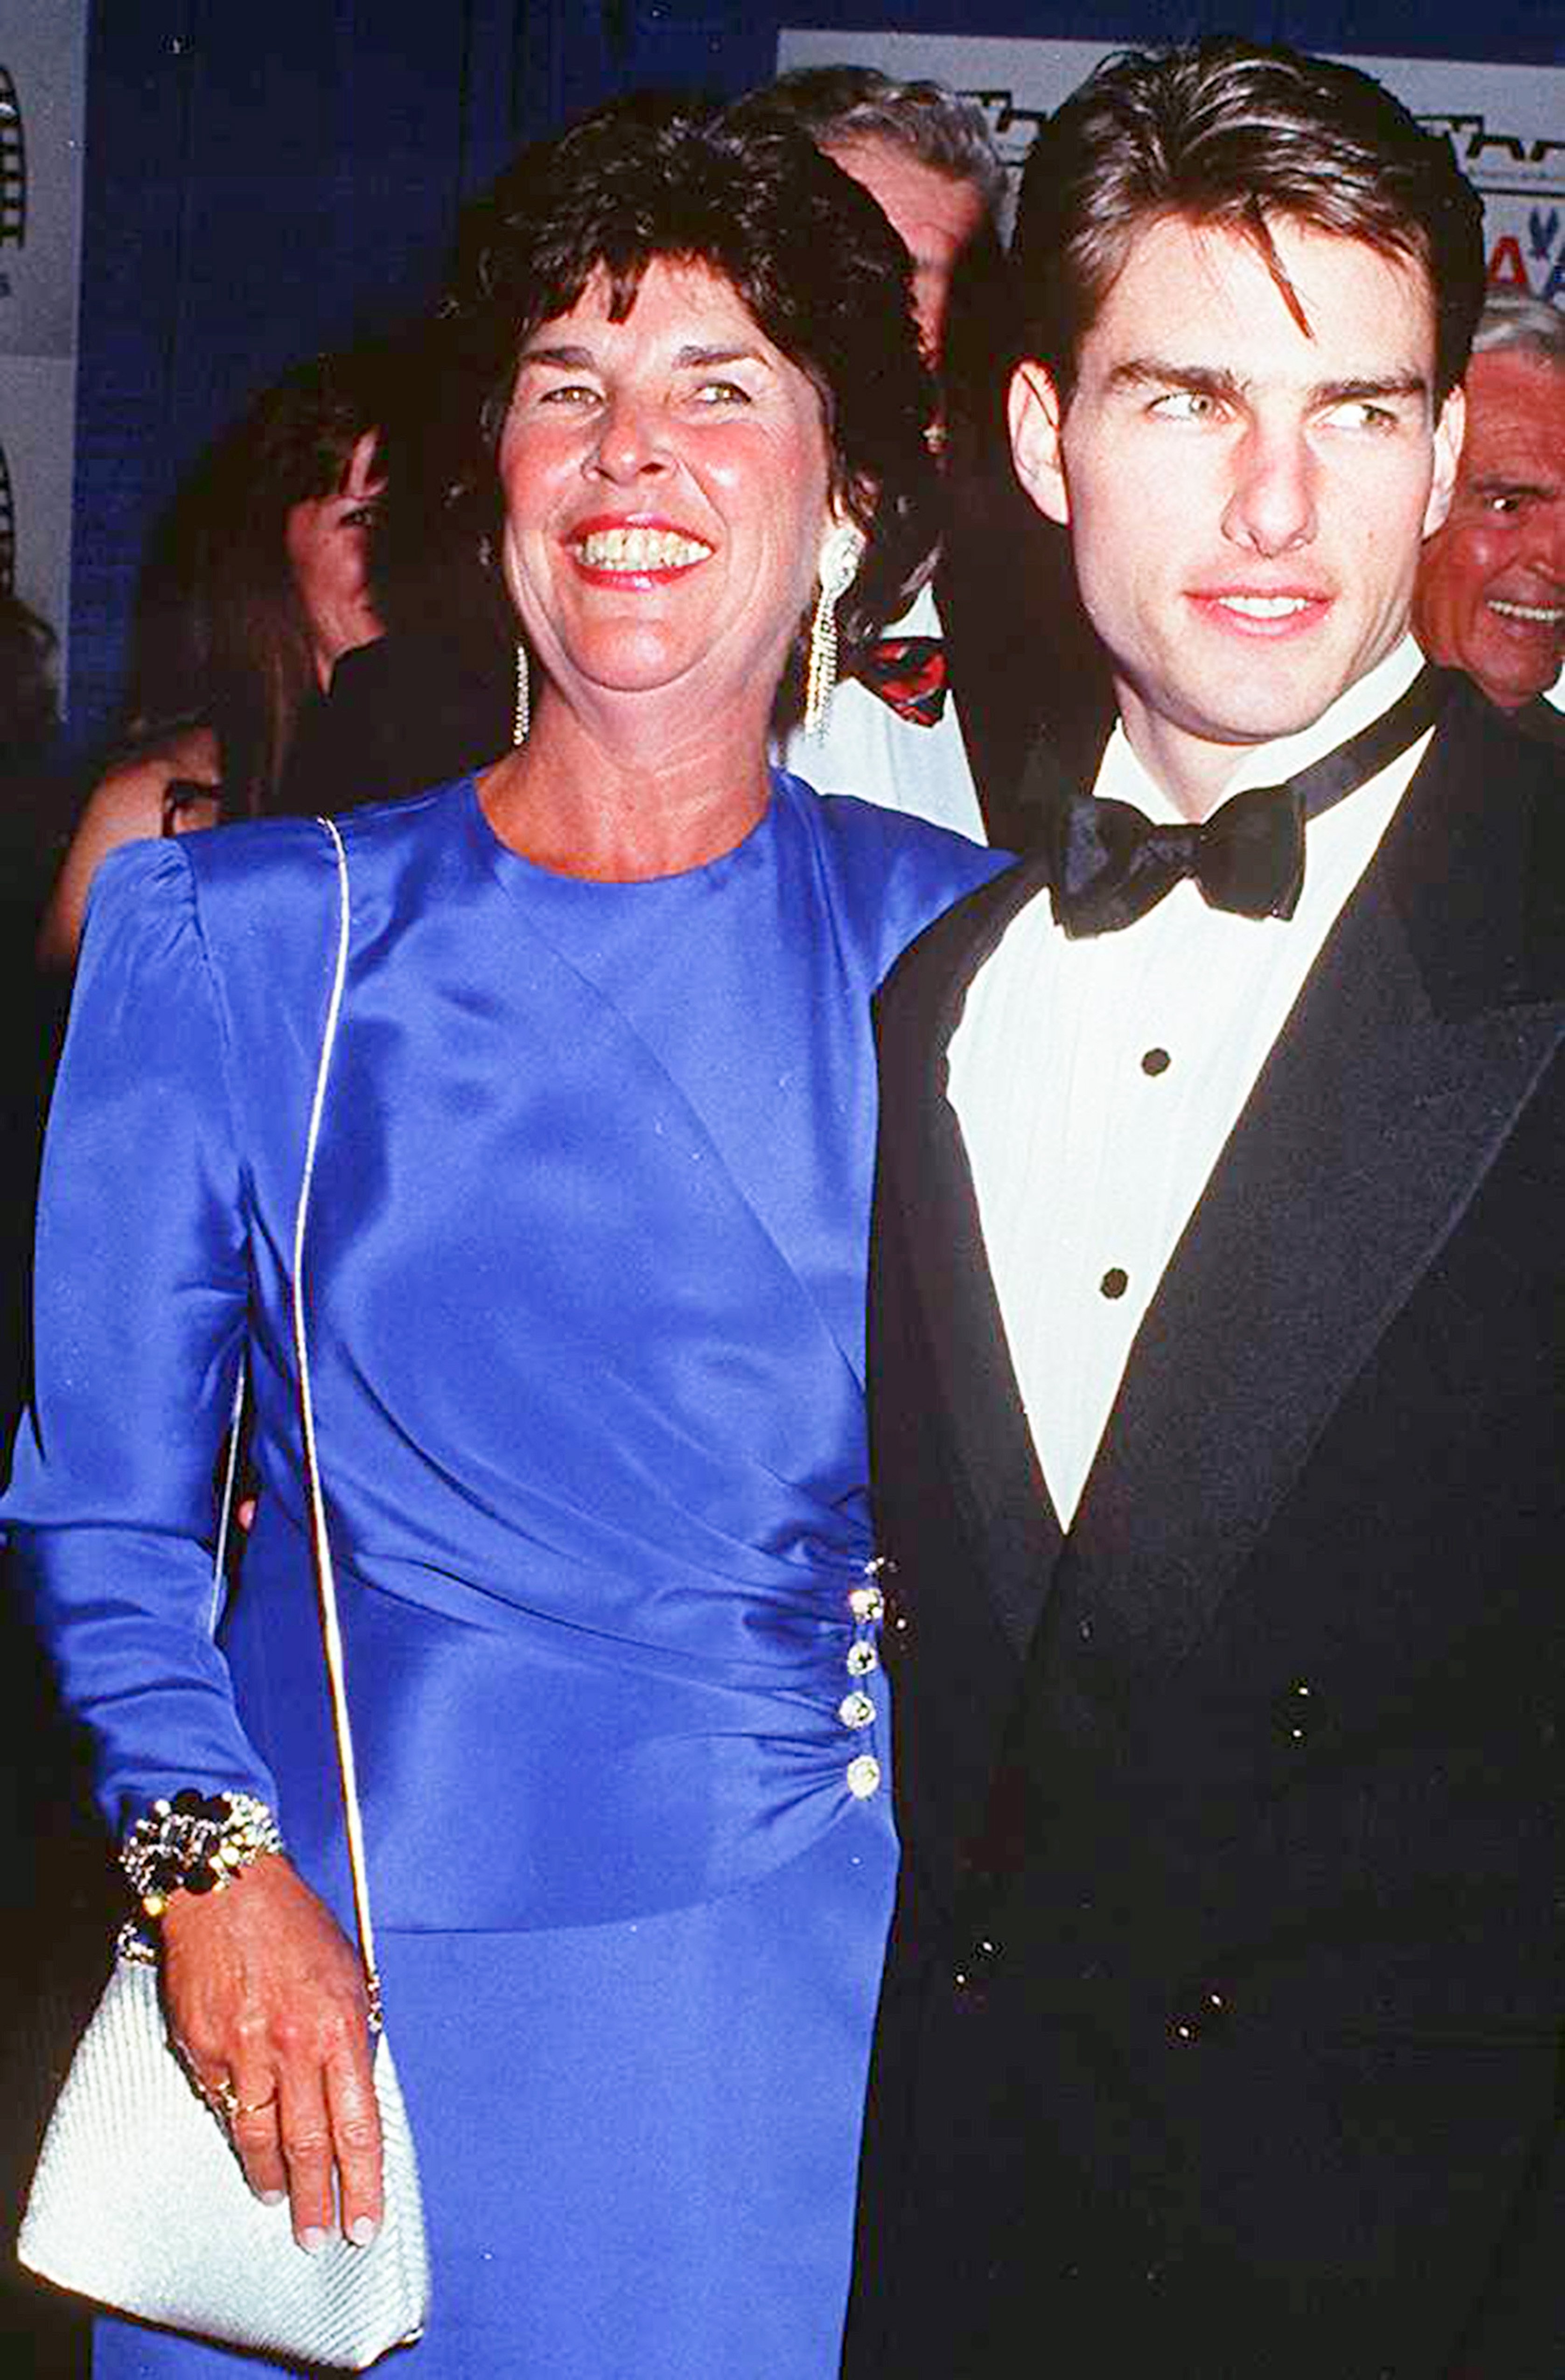 Tom Cruise et sa mère Mary Lee Pfeiffer en 1991. | Source : Getty Images